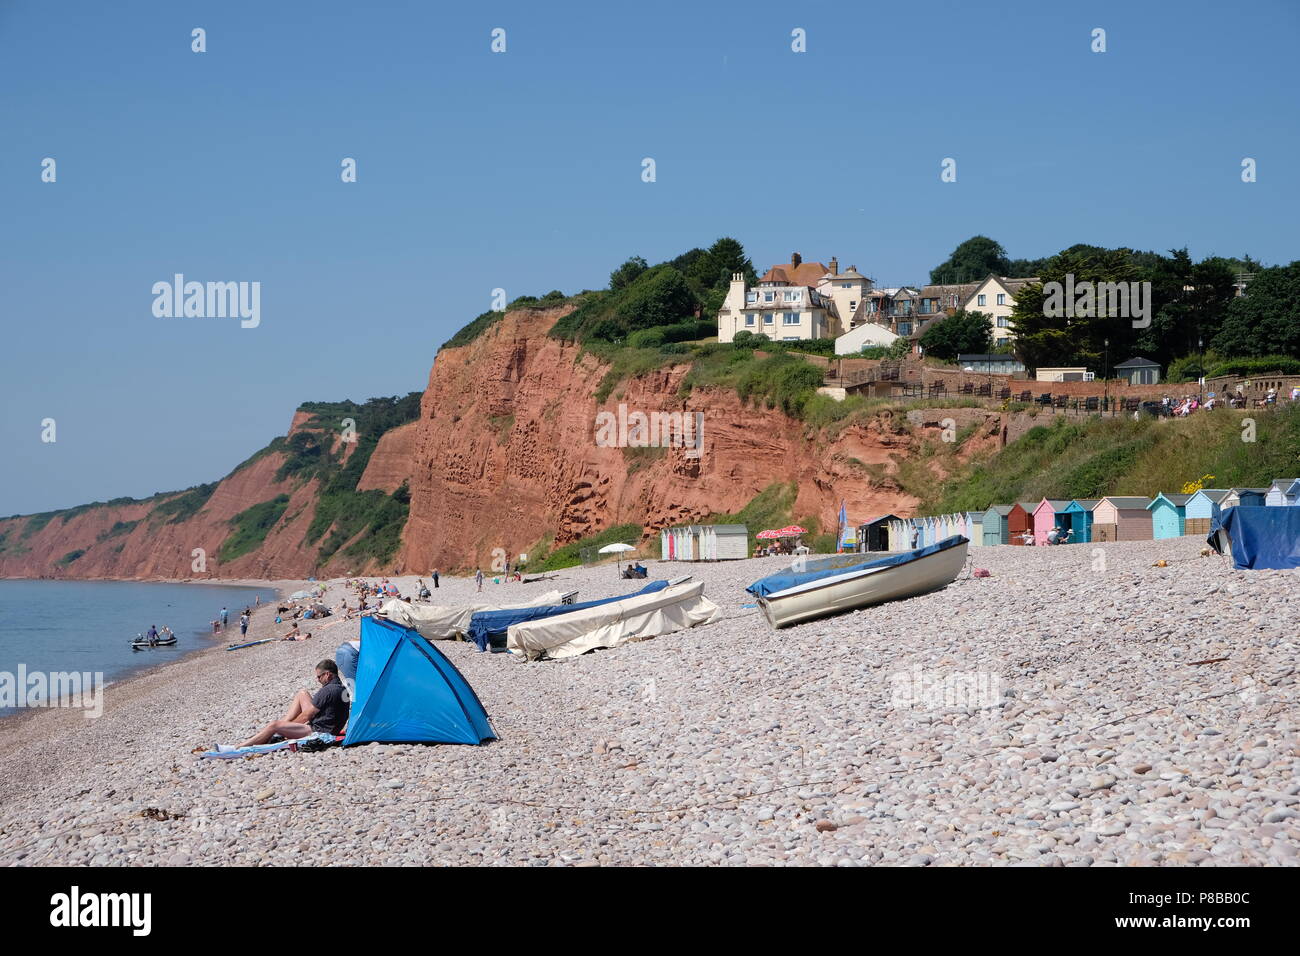 The sea front at Budleigh Salterton, South Devon, England, looking west. The red cliffs visible are of Triassic age, also known as the Jurassic Coast Stock Photo